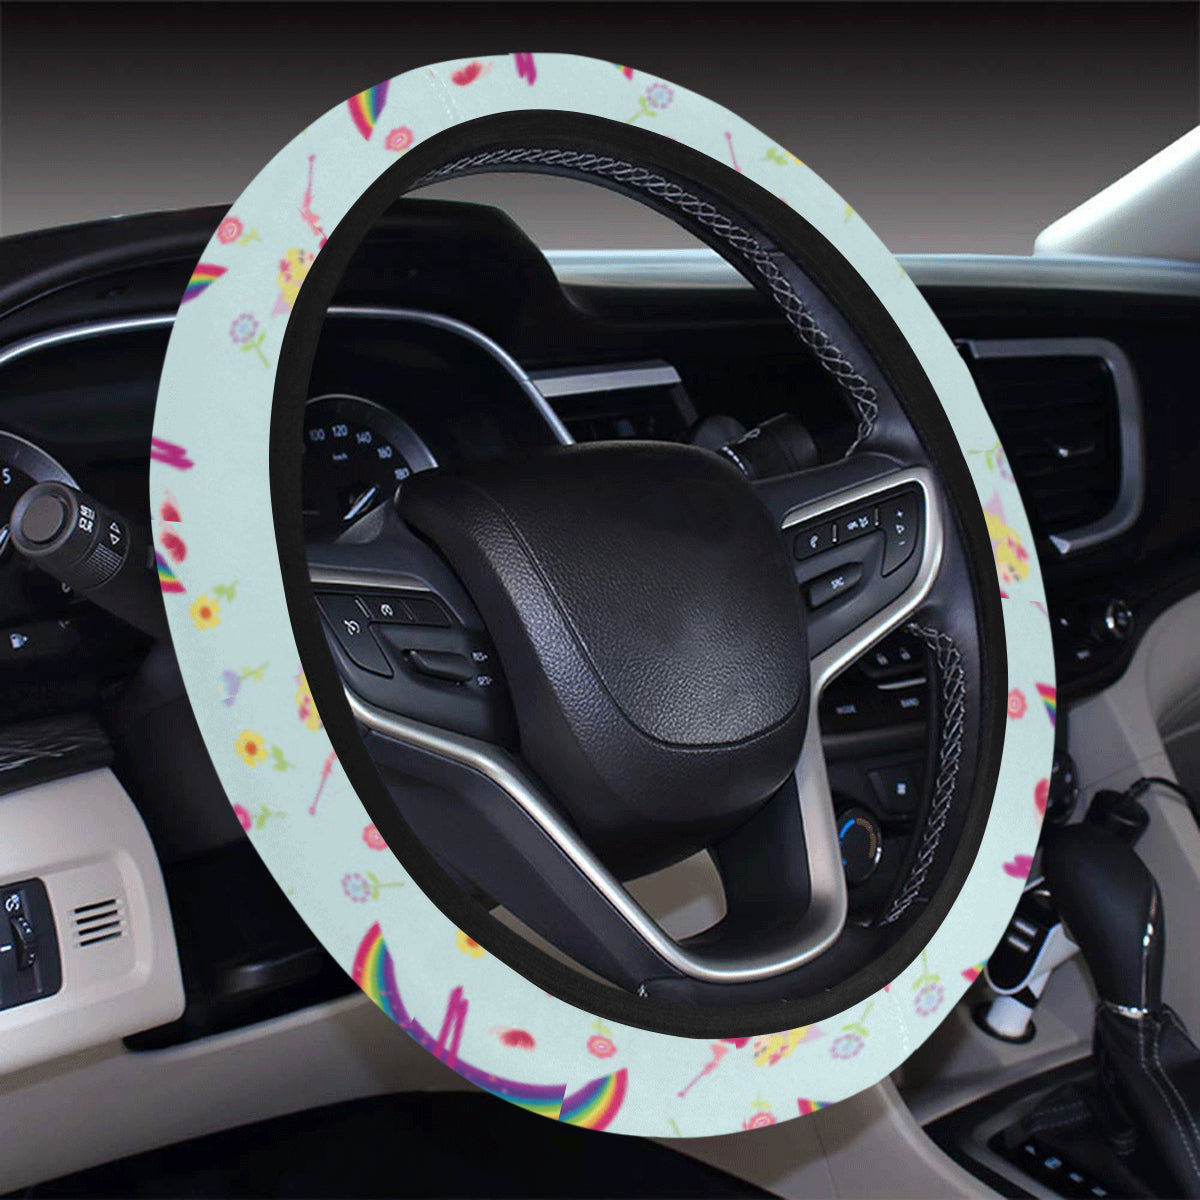 Fairy with Rainbow Print Pattern Steering Wheel Cover with Elastic Edge